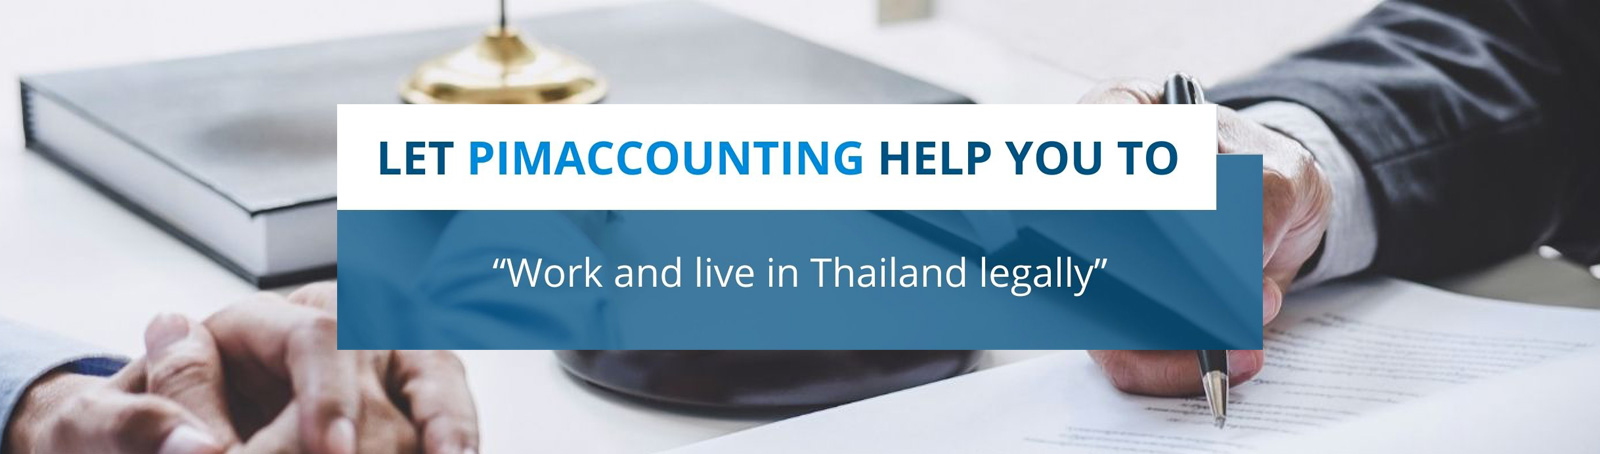 Pimaccounting help you to “Work and live in Thailand legally”